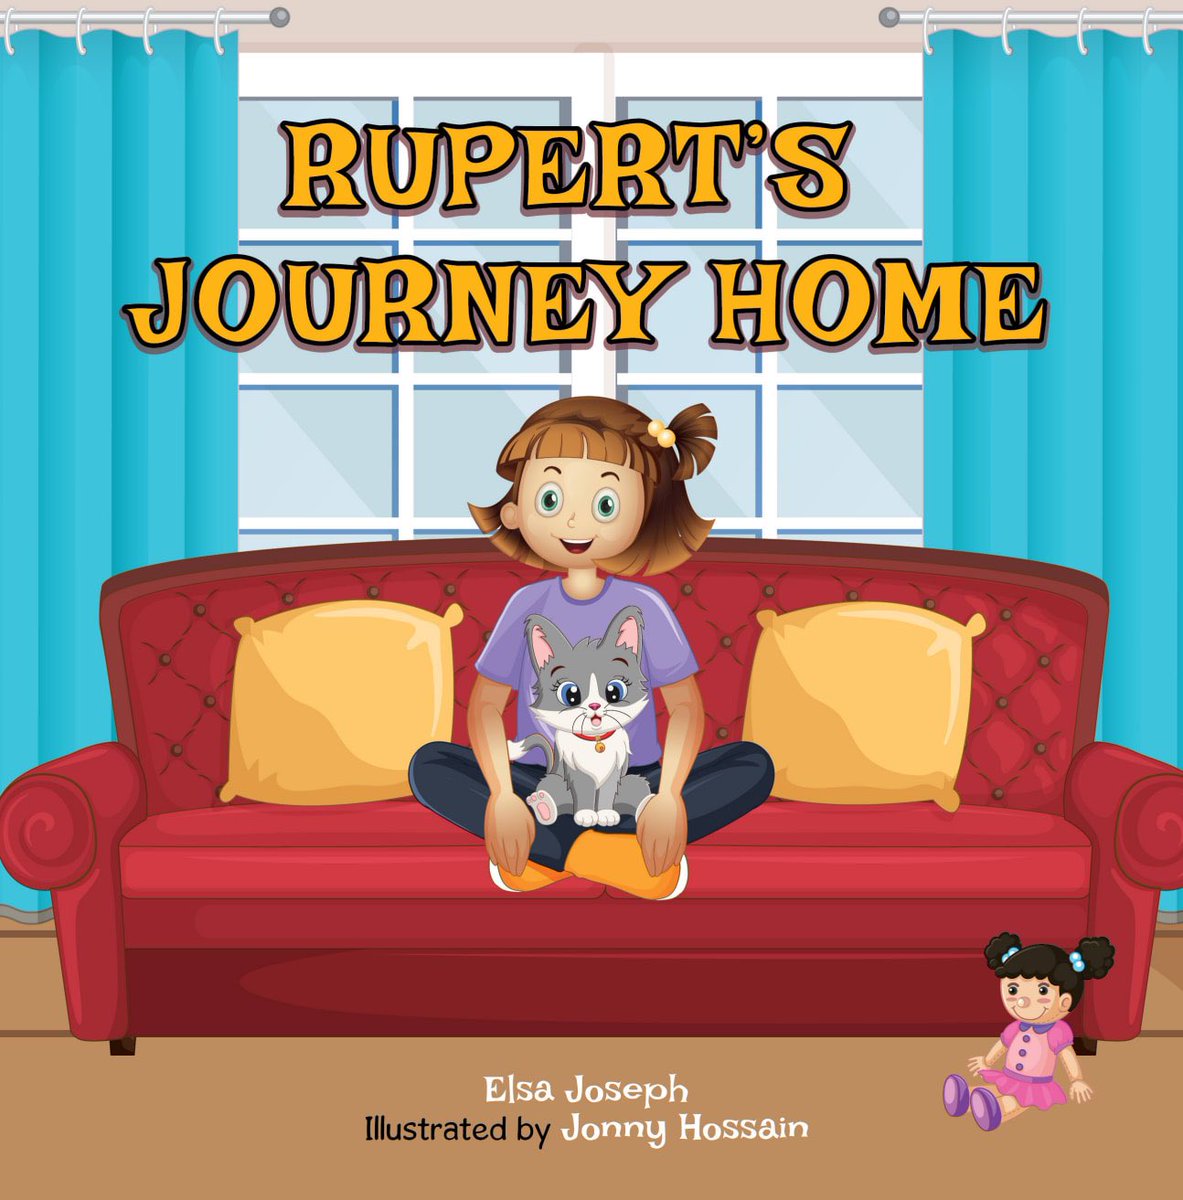 Read Rupert’s Journey Home by Elsa Joseph 

amazon.co.uk/gp/aw/d/B0CSXM…

#bookstagrammer #booklover #booklove #bookstagram #bookworm #biblophile #bookcommunity #bookporn #bookaccount #bookish #bookobsessed #bookobsession